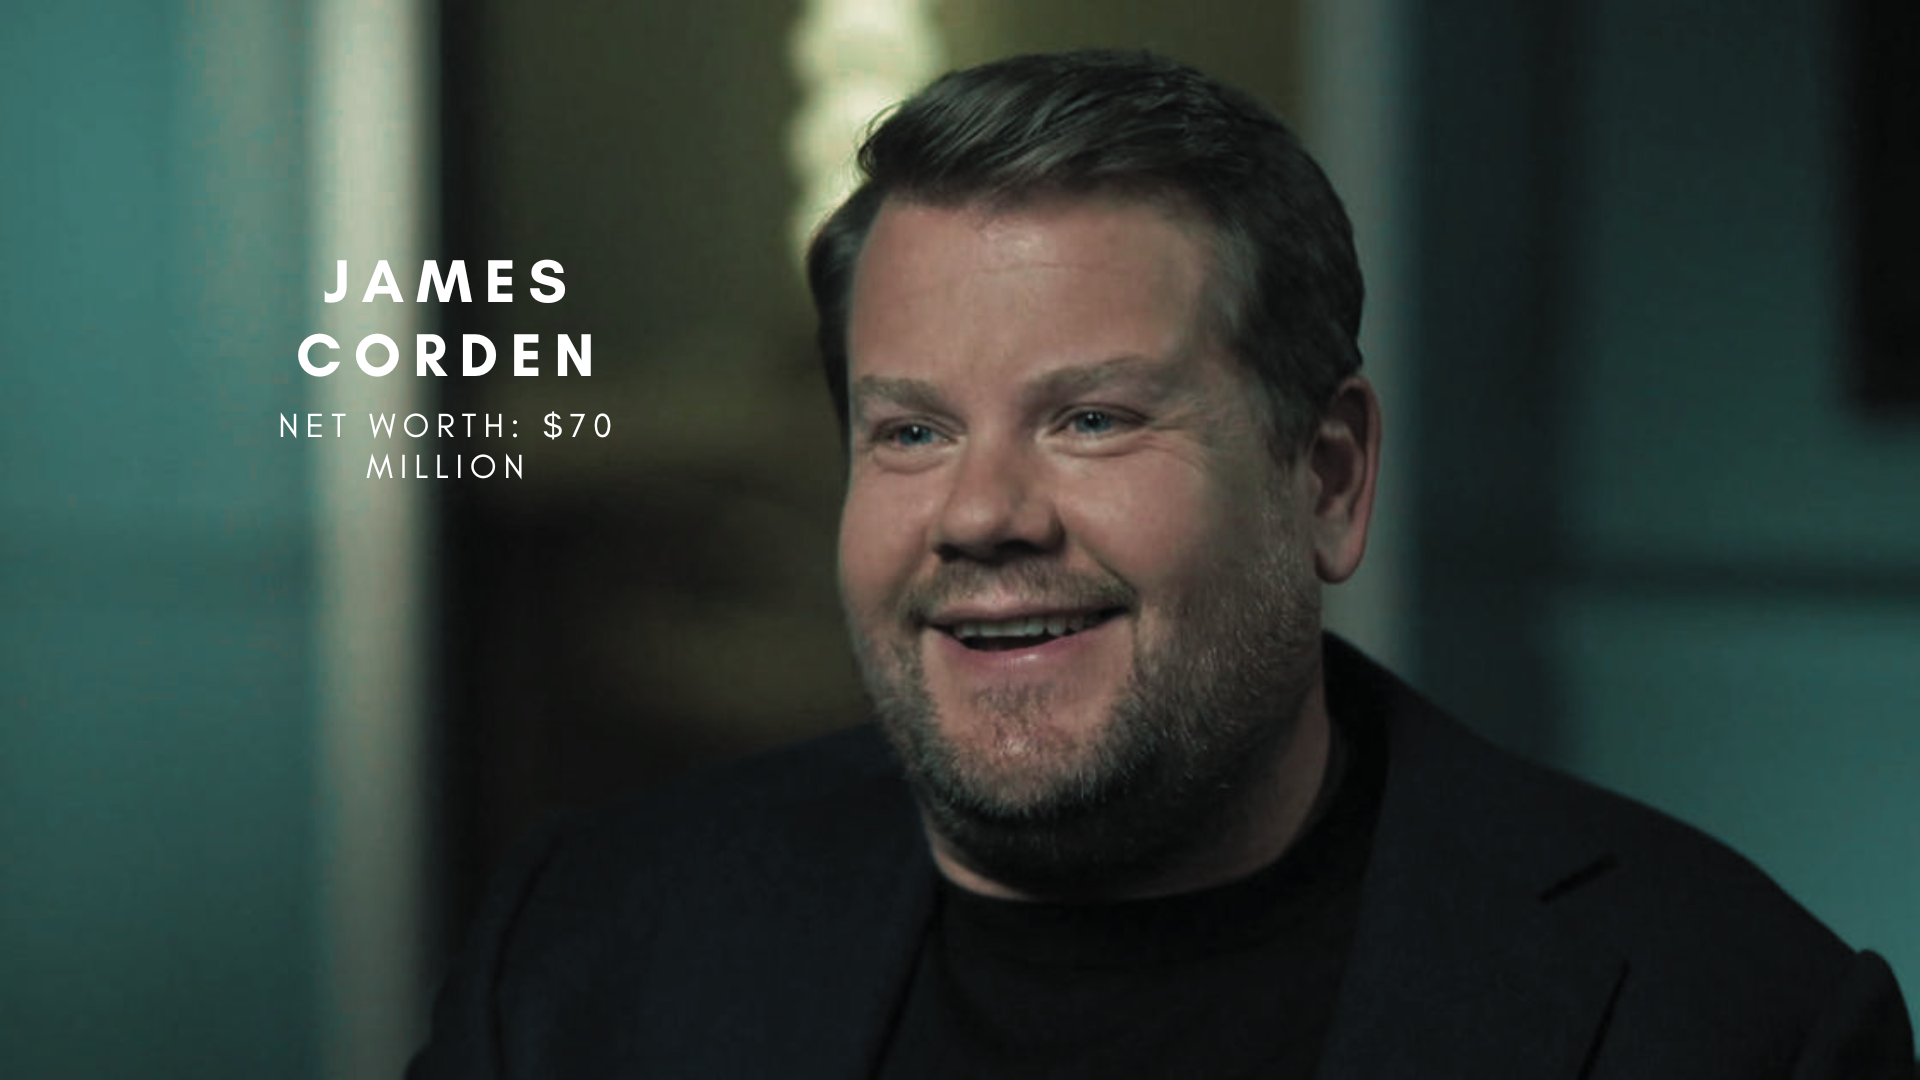 James Corden - Net Worth, Salary, Career, and Personal Life